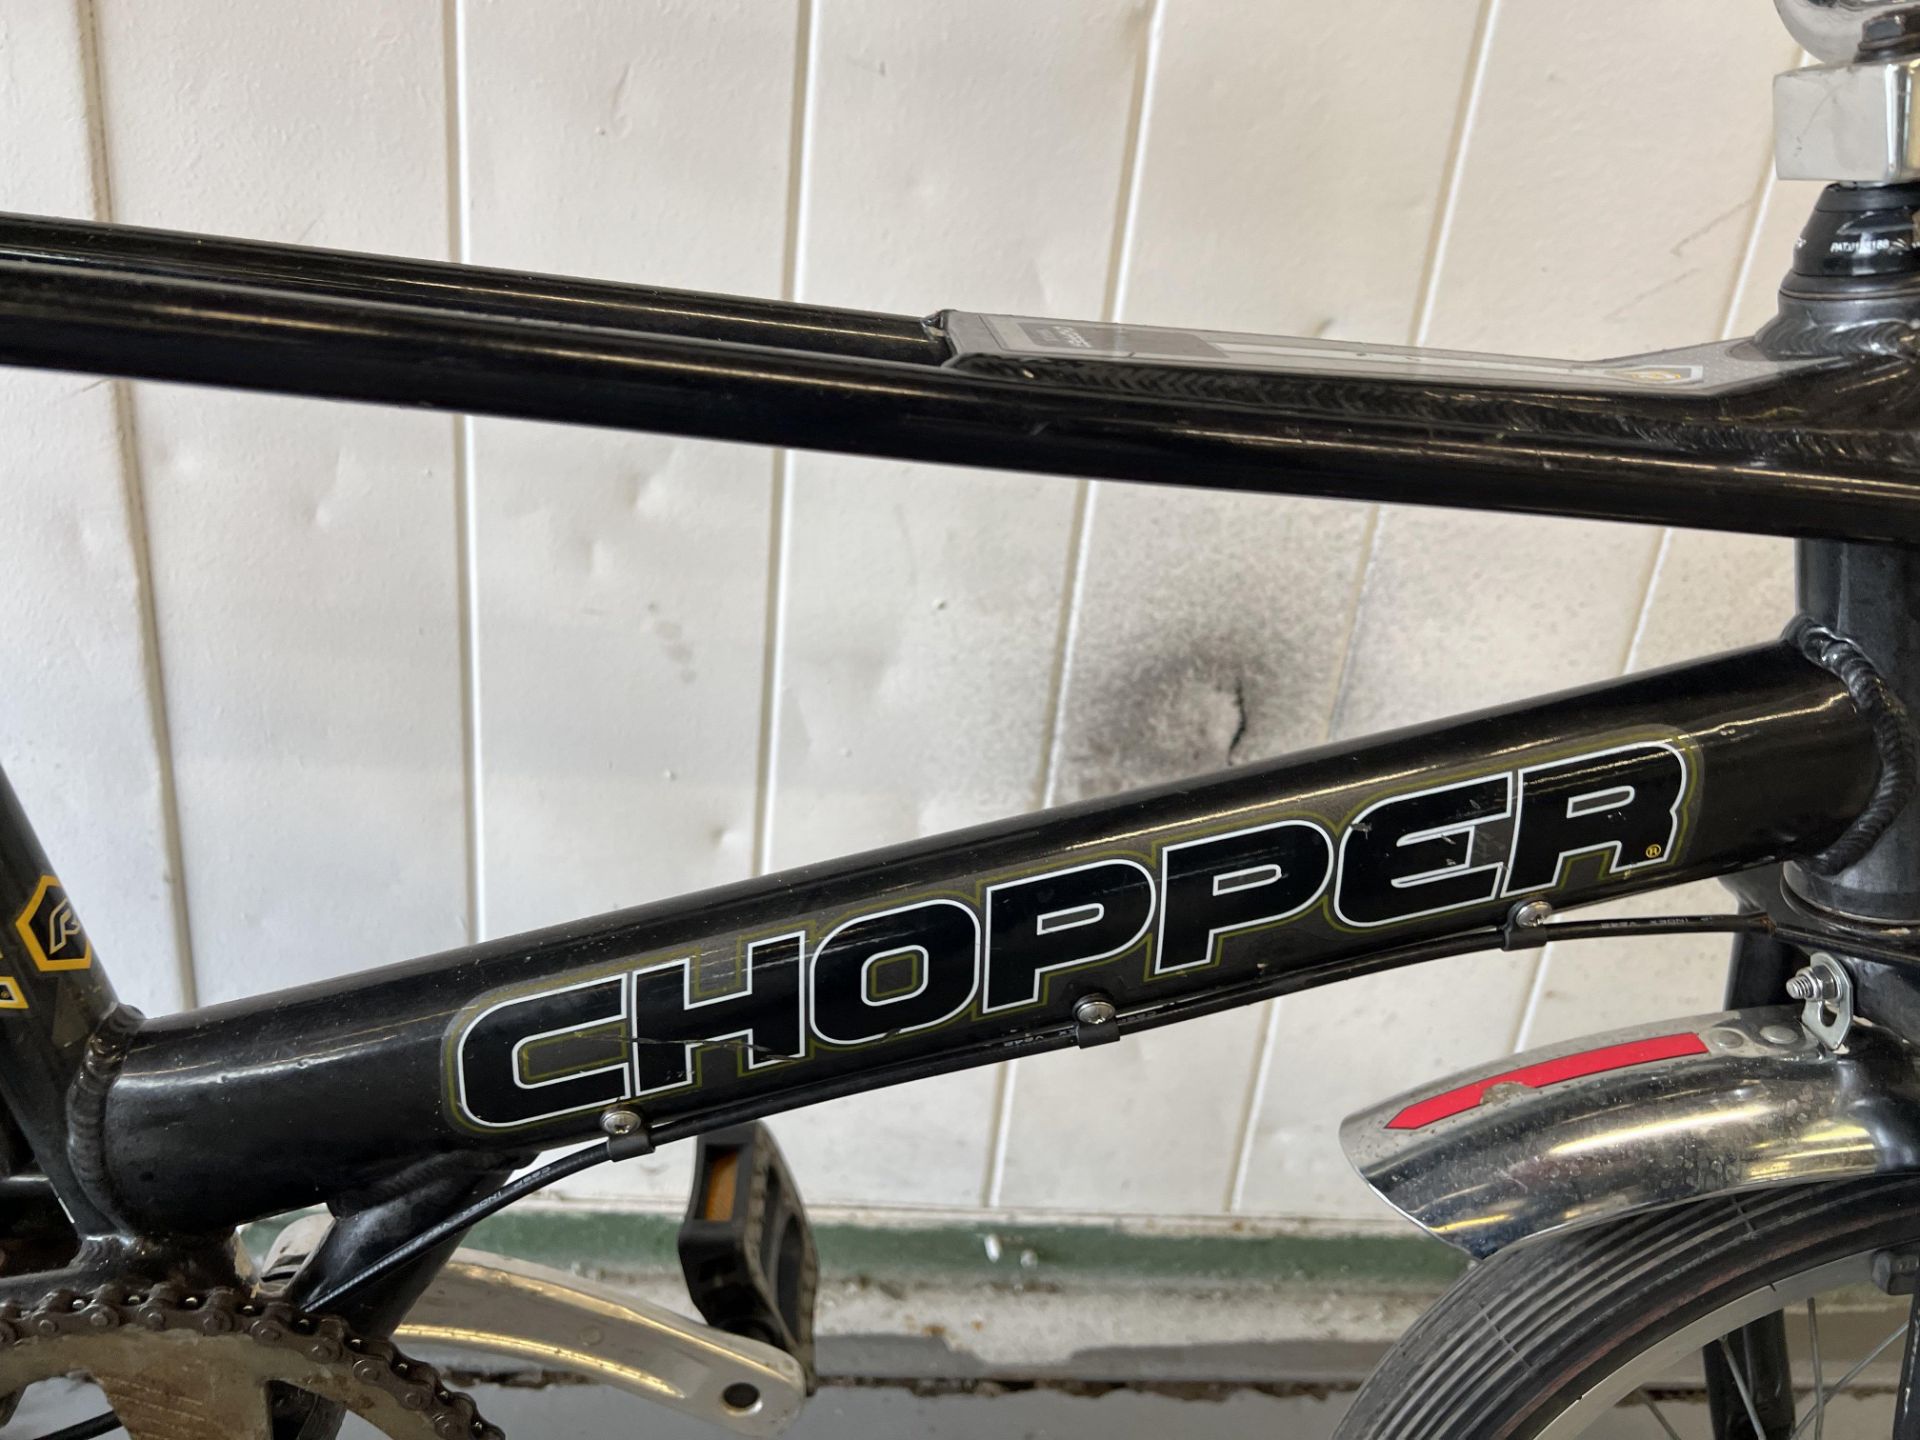 Raleigh Chopper - Image 9 of 10